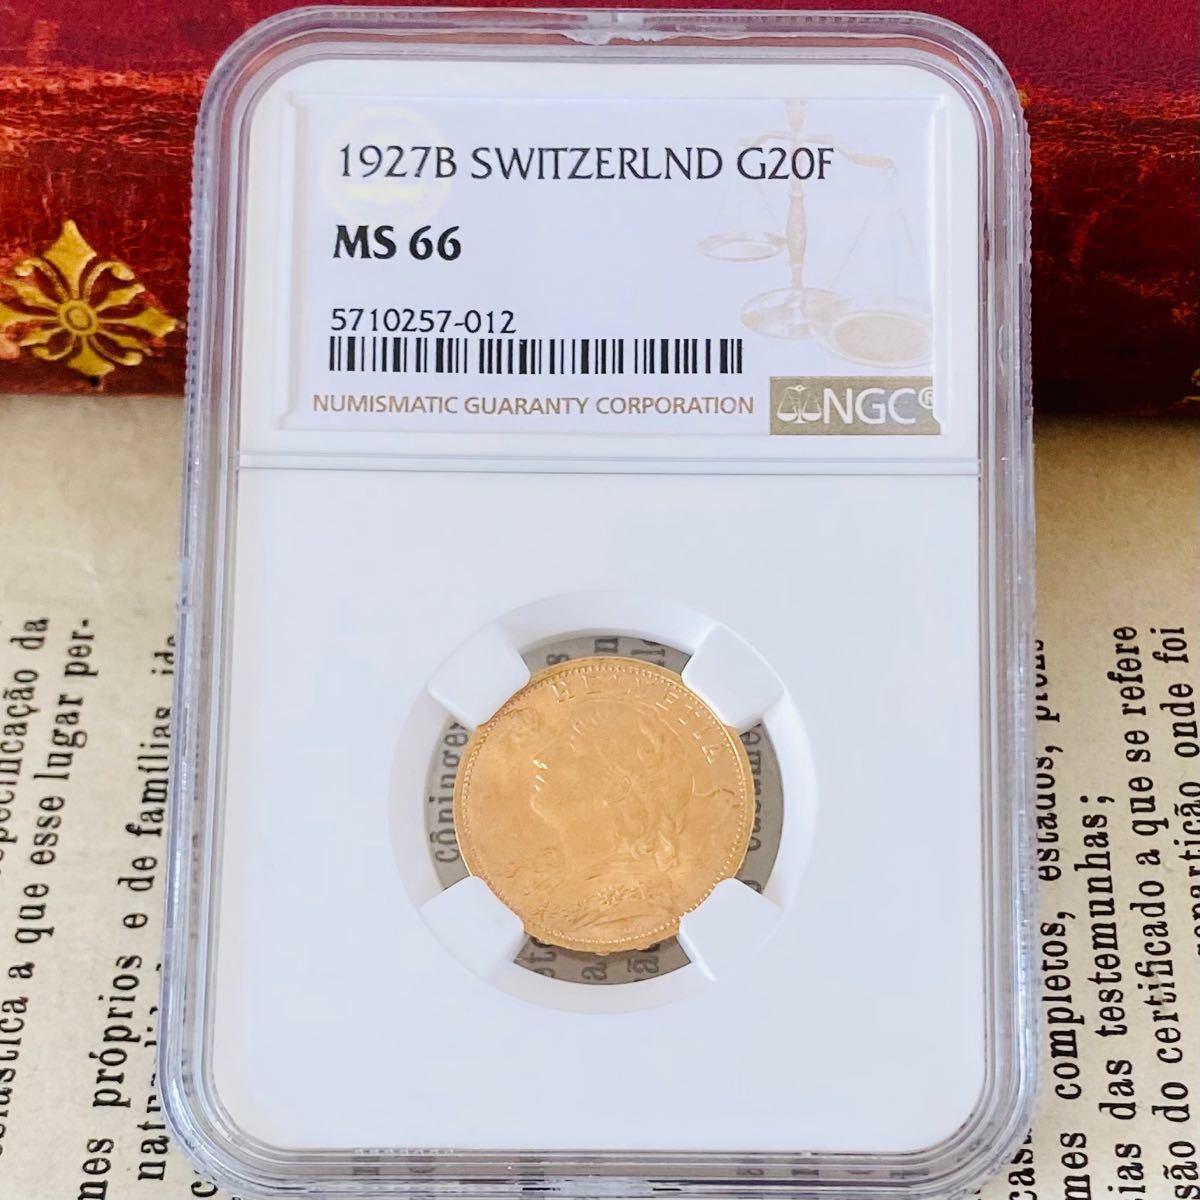 OUTLET 包装 即日発送 代引無料 ☆NGC☆1927B MS66 スイス☆金貨 20